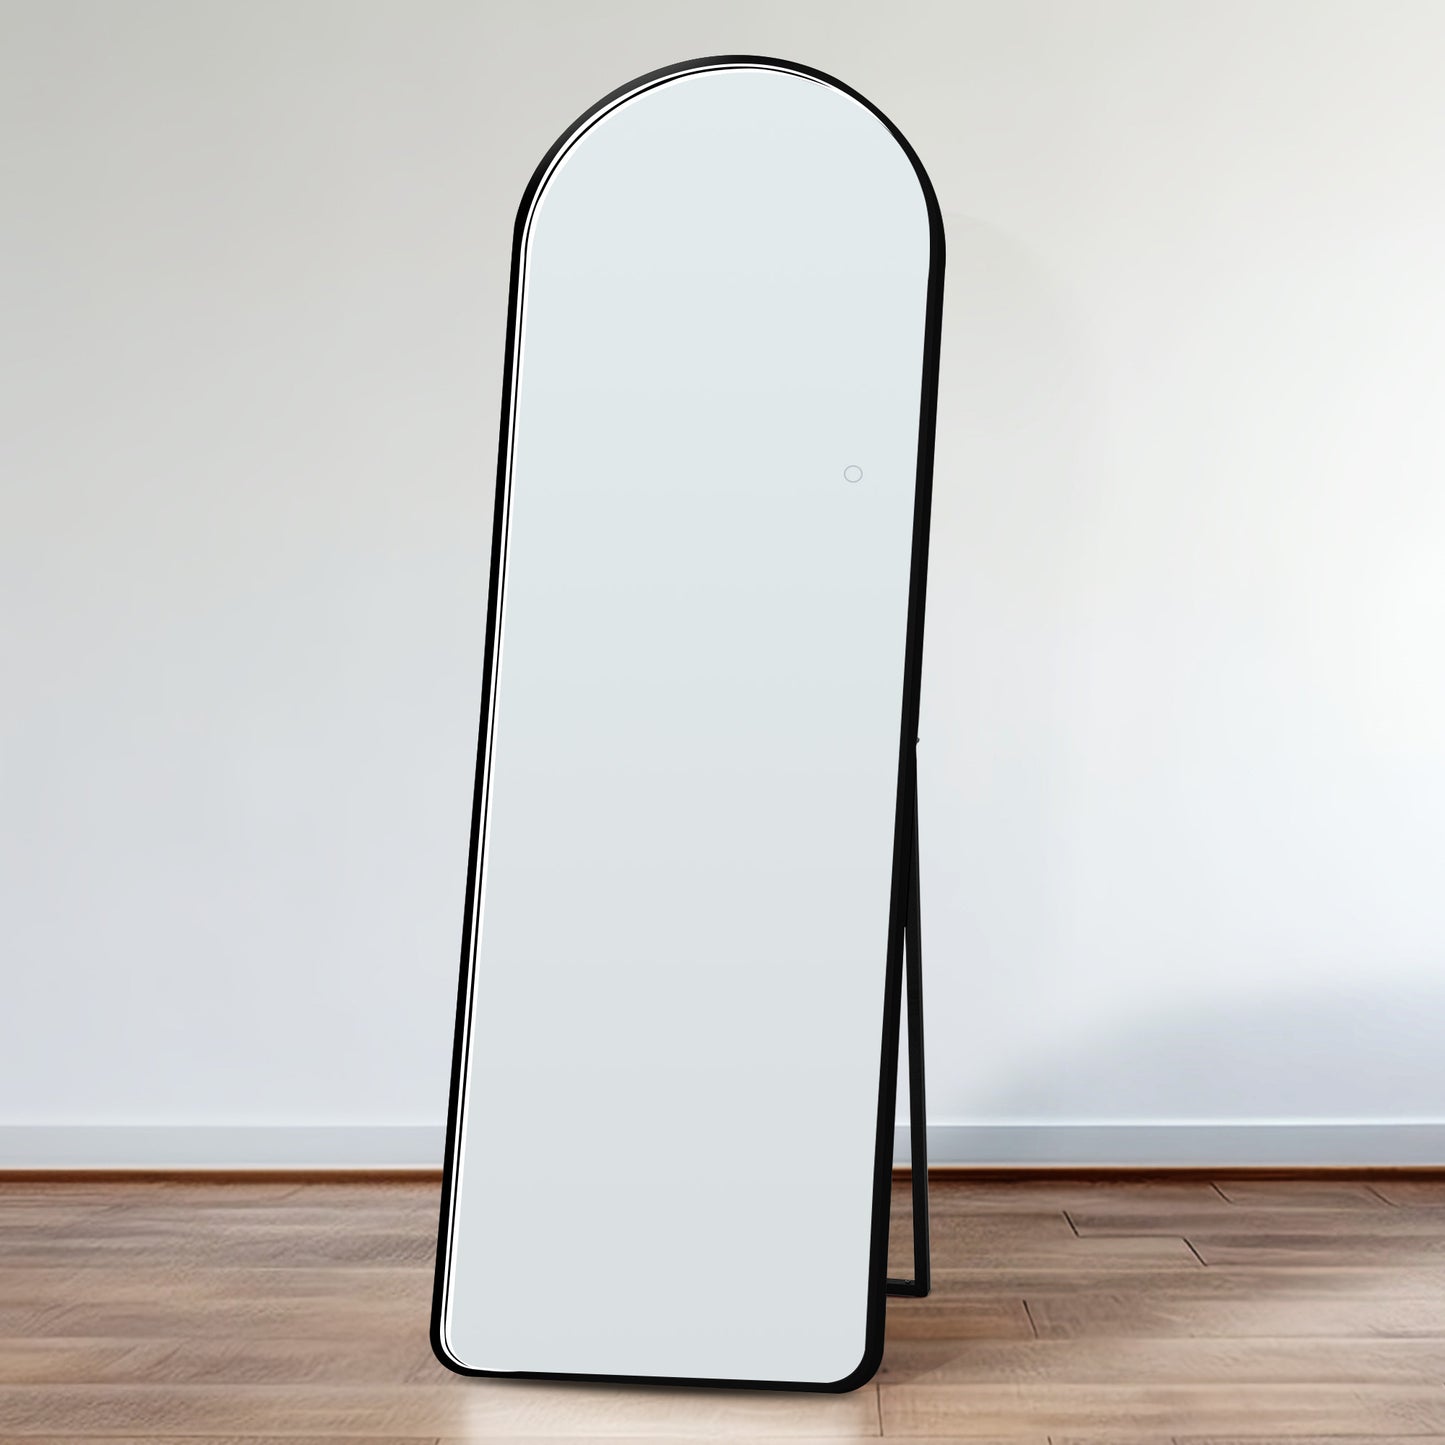 Soges Professional Full Length Mirror with Arched Design, LED Lights and Storage - Floor Standing Dressing Mirror Black